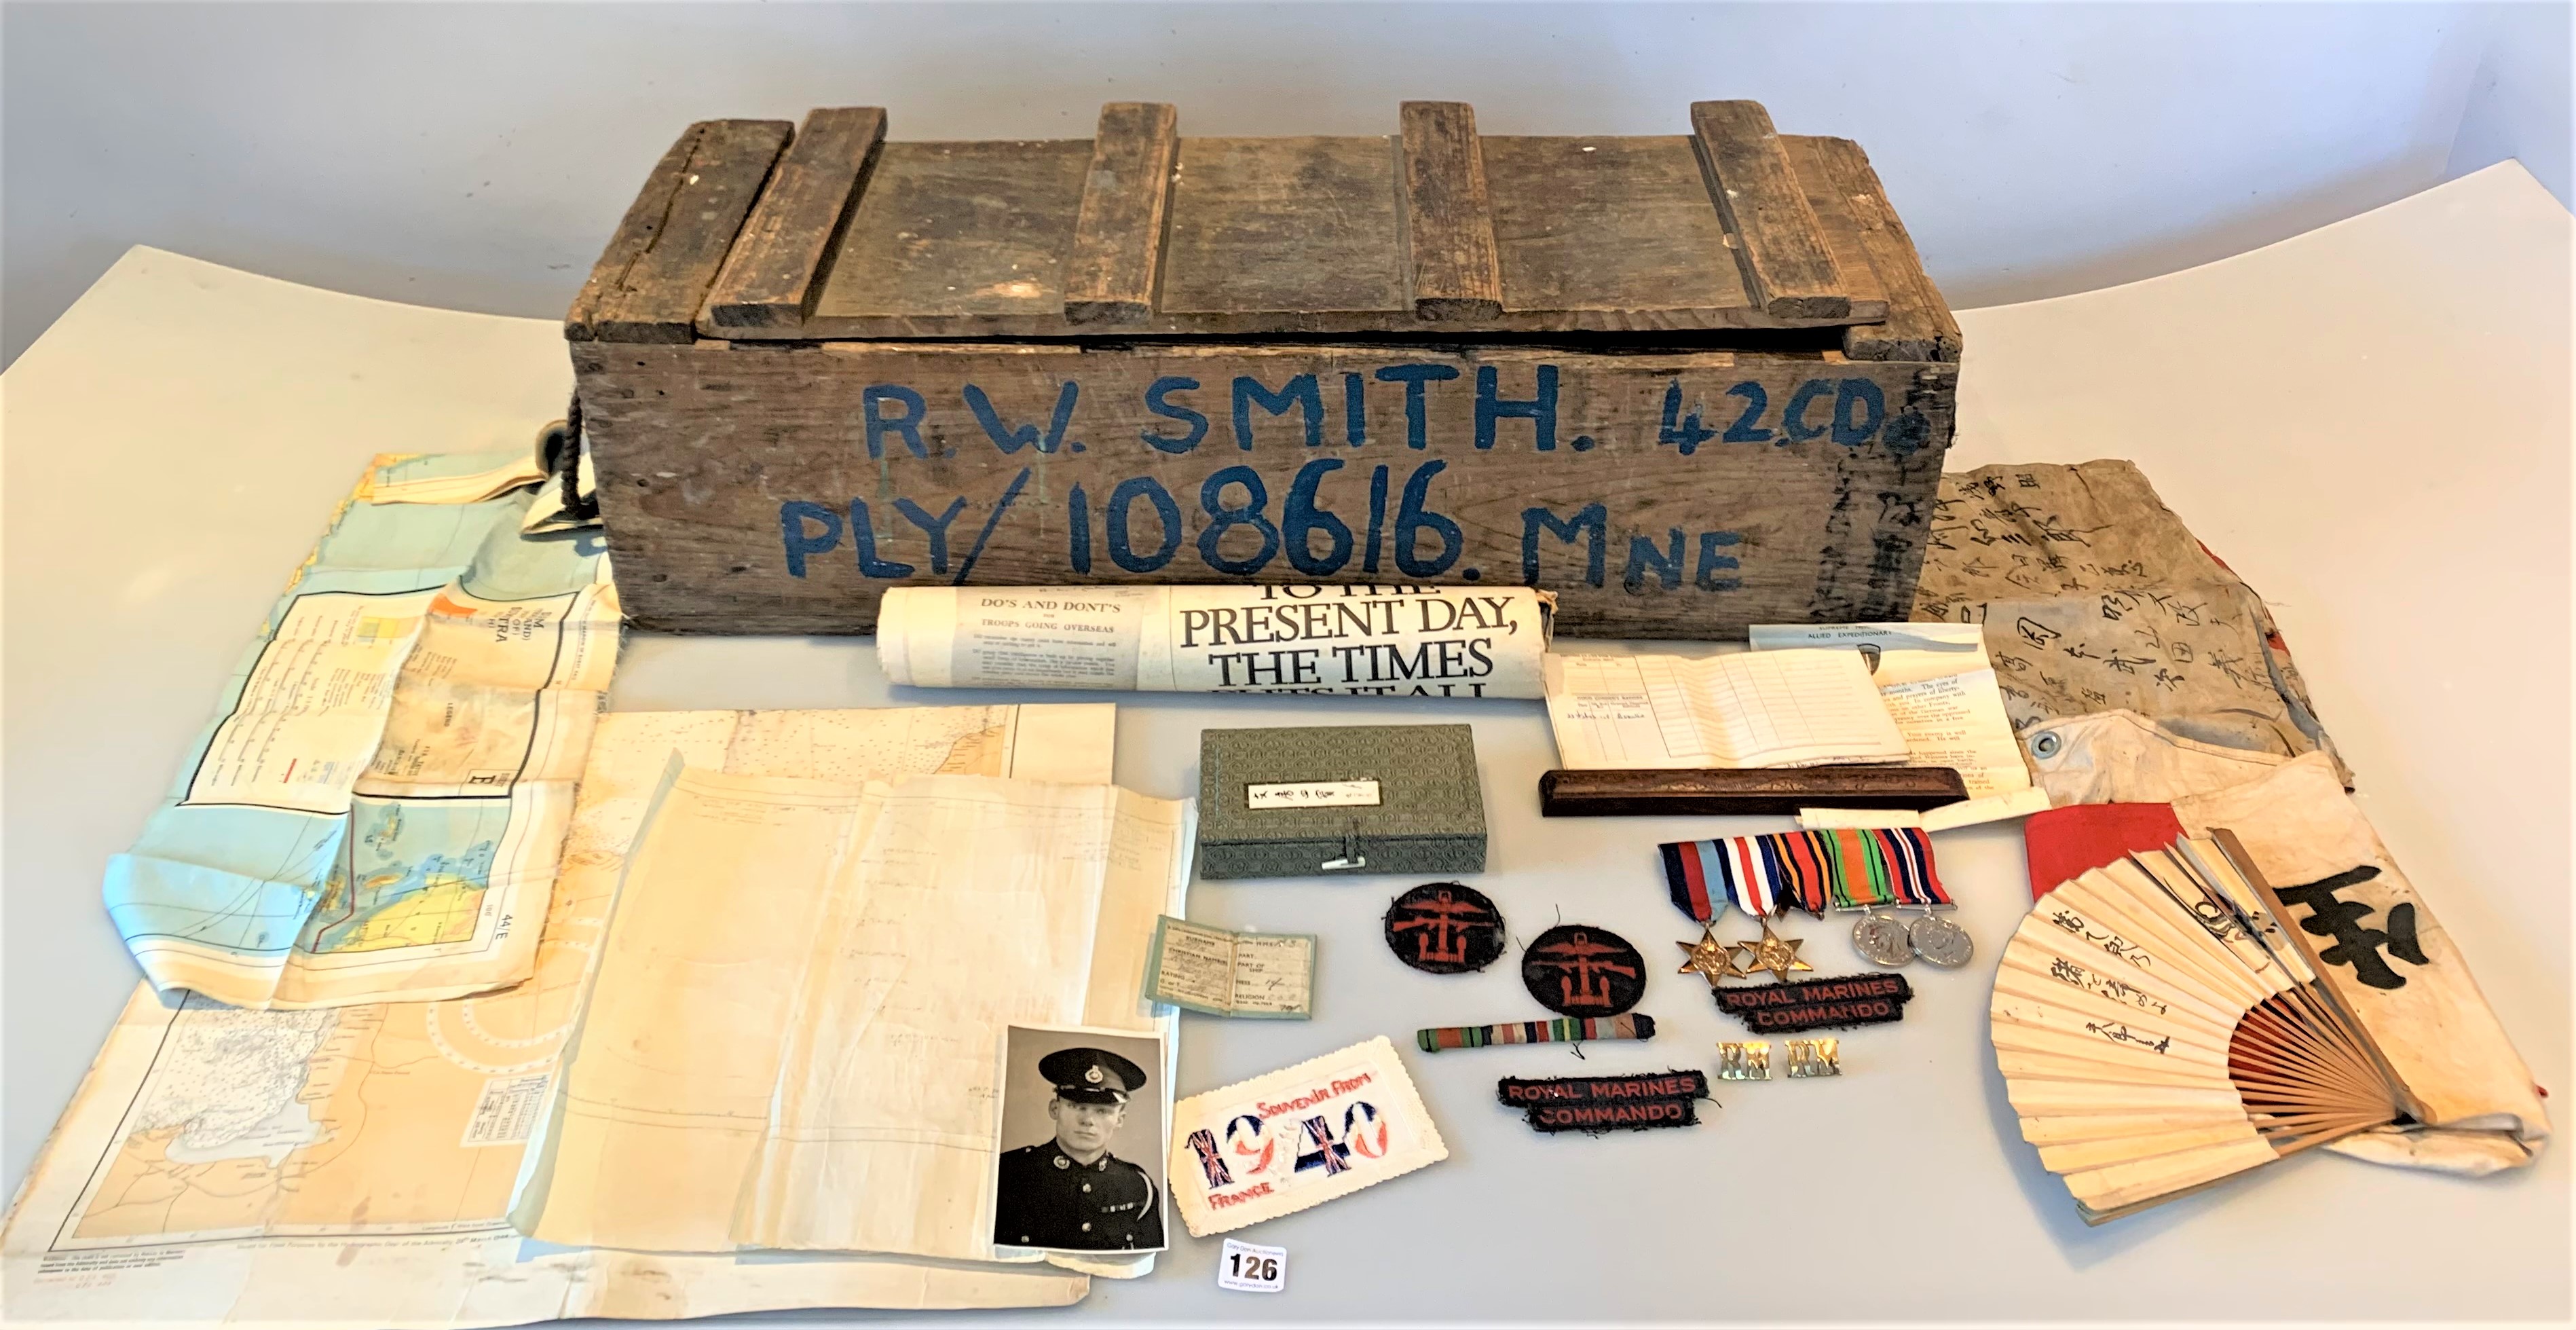 Important collection of militaria belonging to Robert Wellesley Smith, Royal Marines Commando